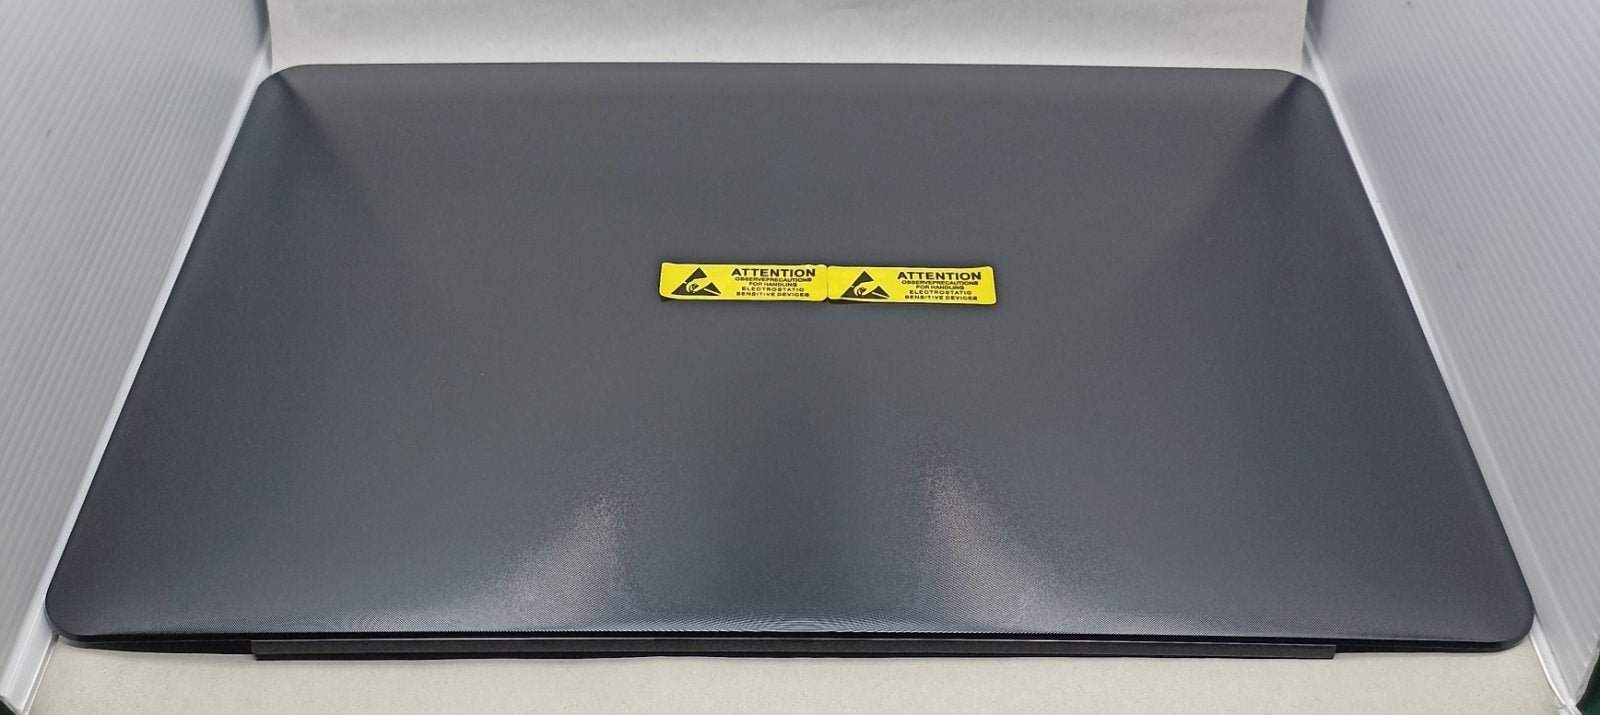 Replacement LCD Cover For Asus K555UB WL